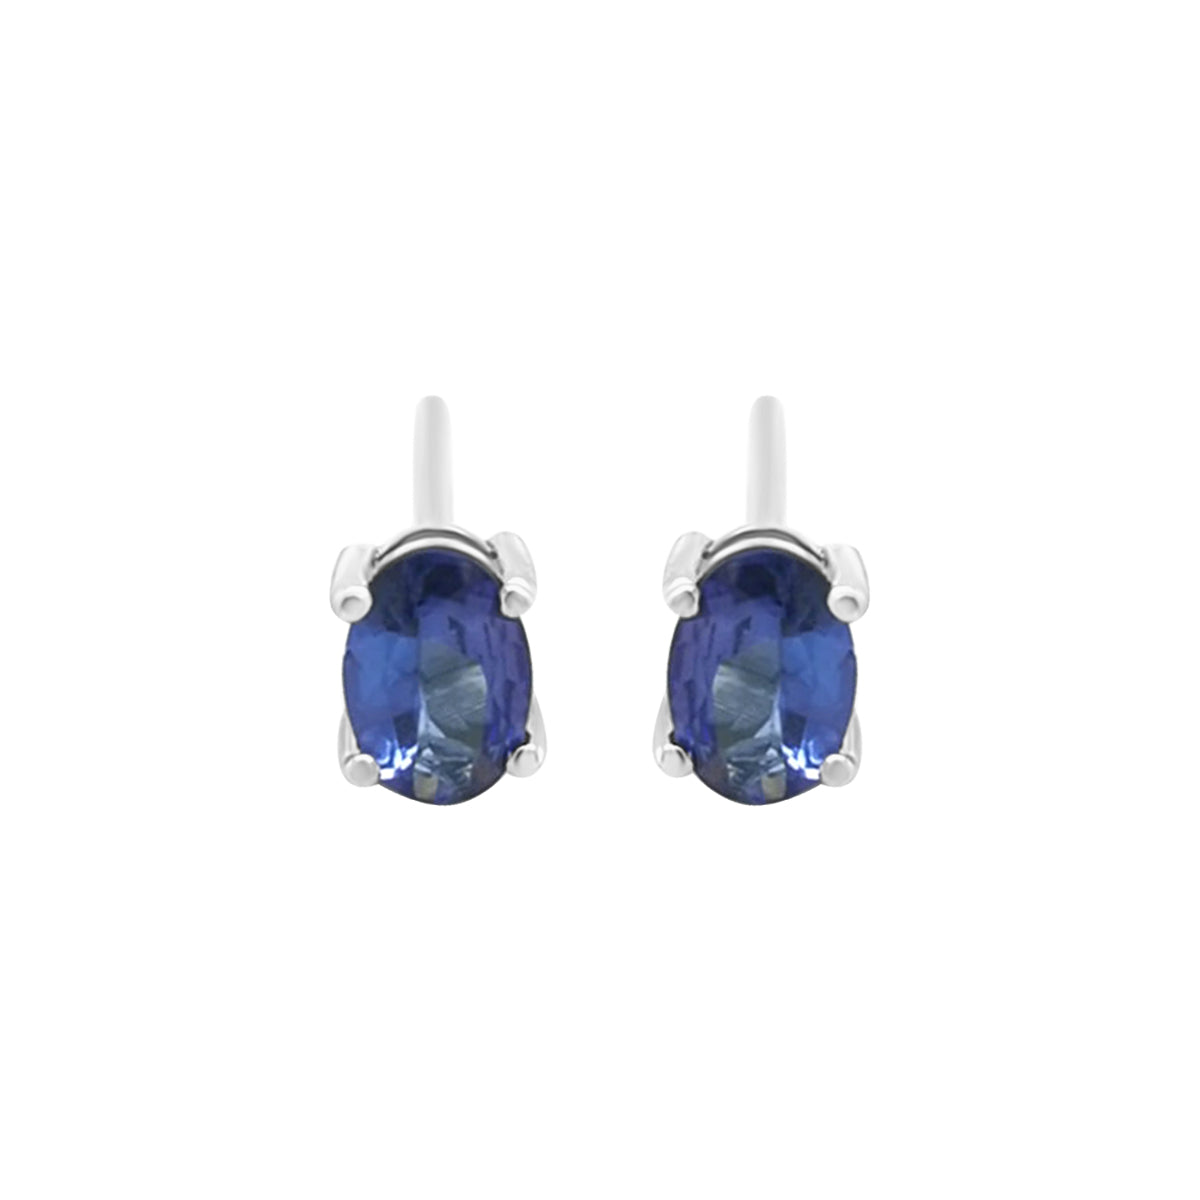 Solitaire Tanzanite Stud Earrings In 18k White Gold.